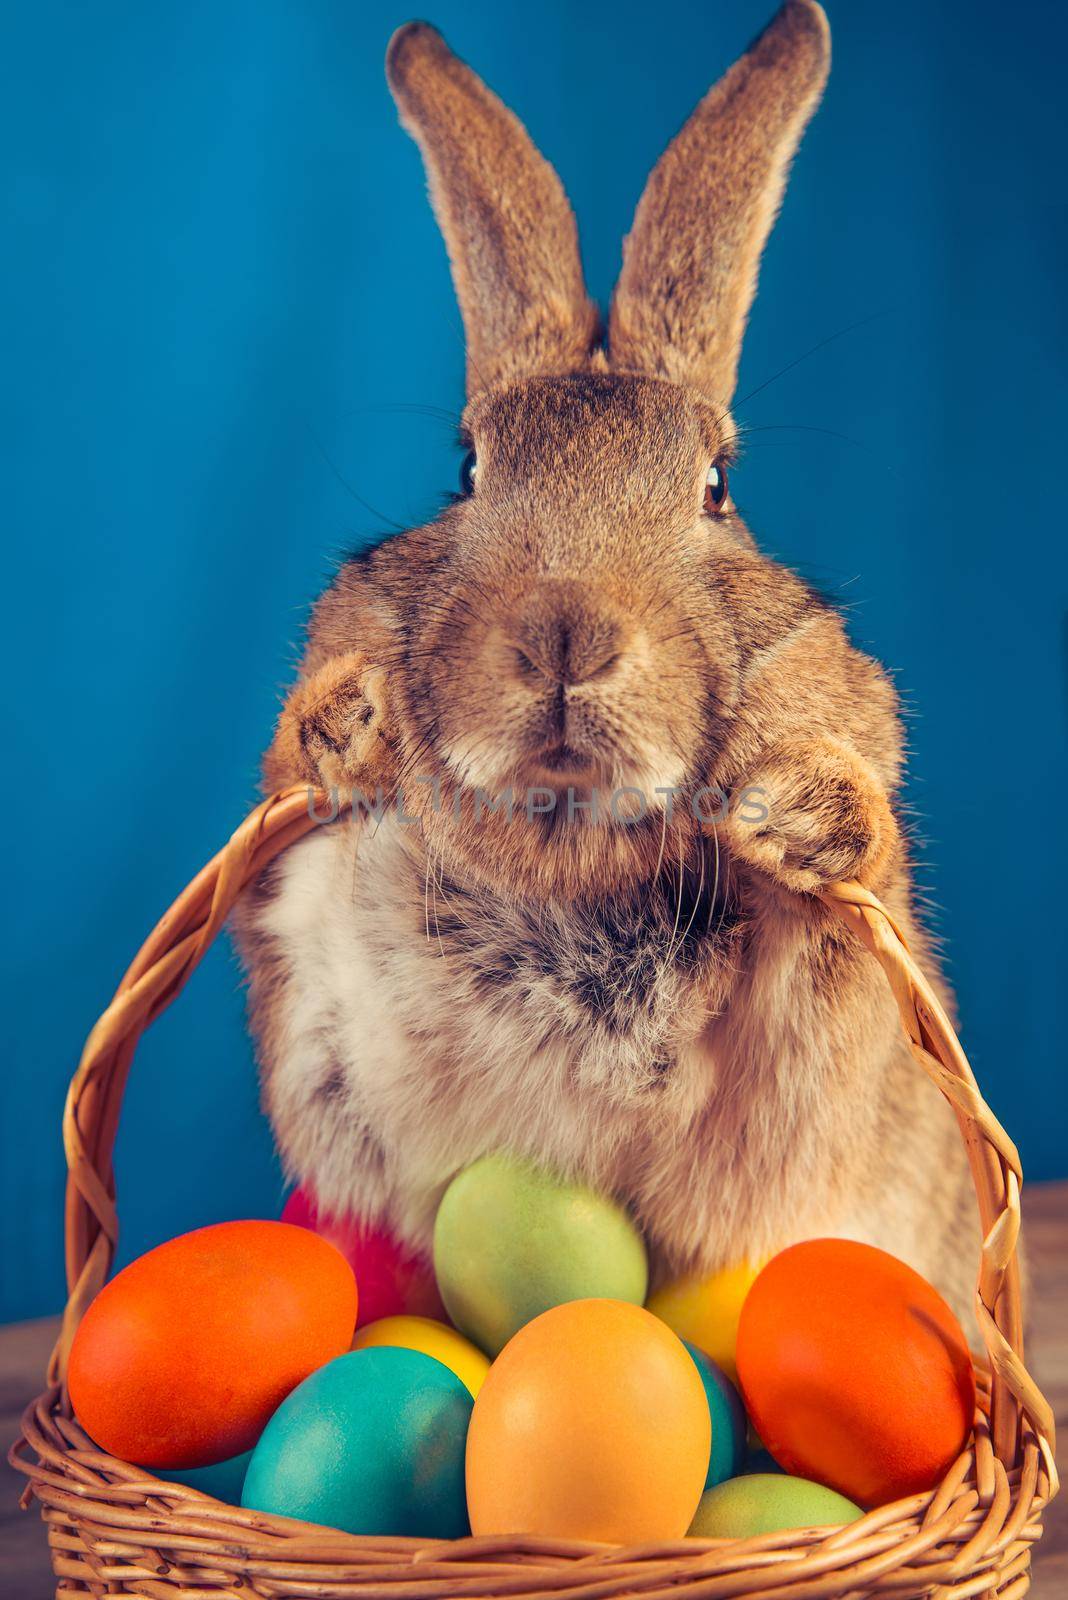 Easter rabbit with a basket of colored eggs on a blue background